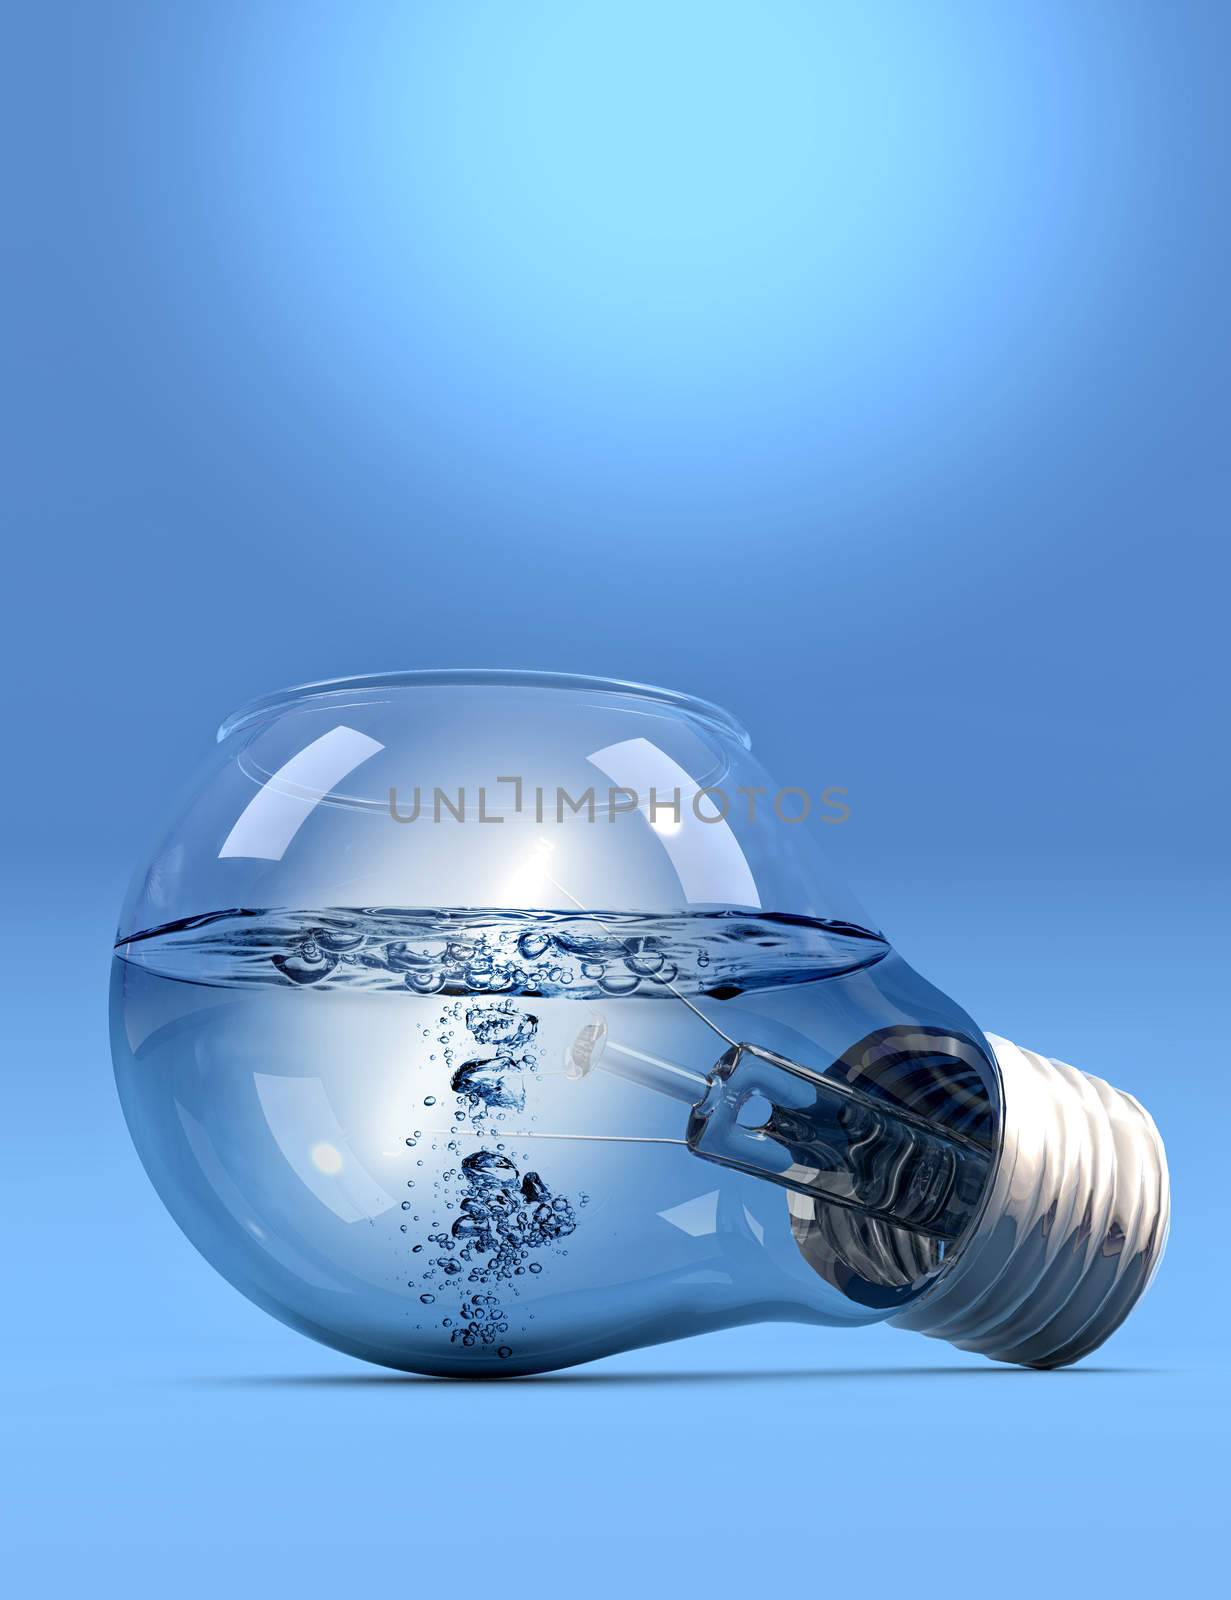 LightBulb with water by dynamicfoto